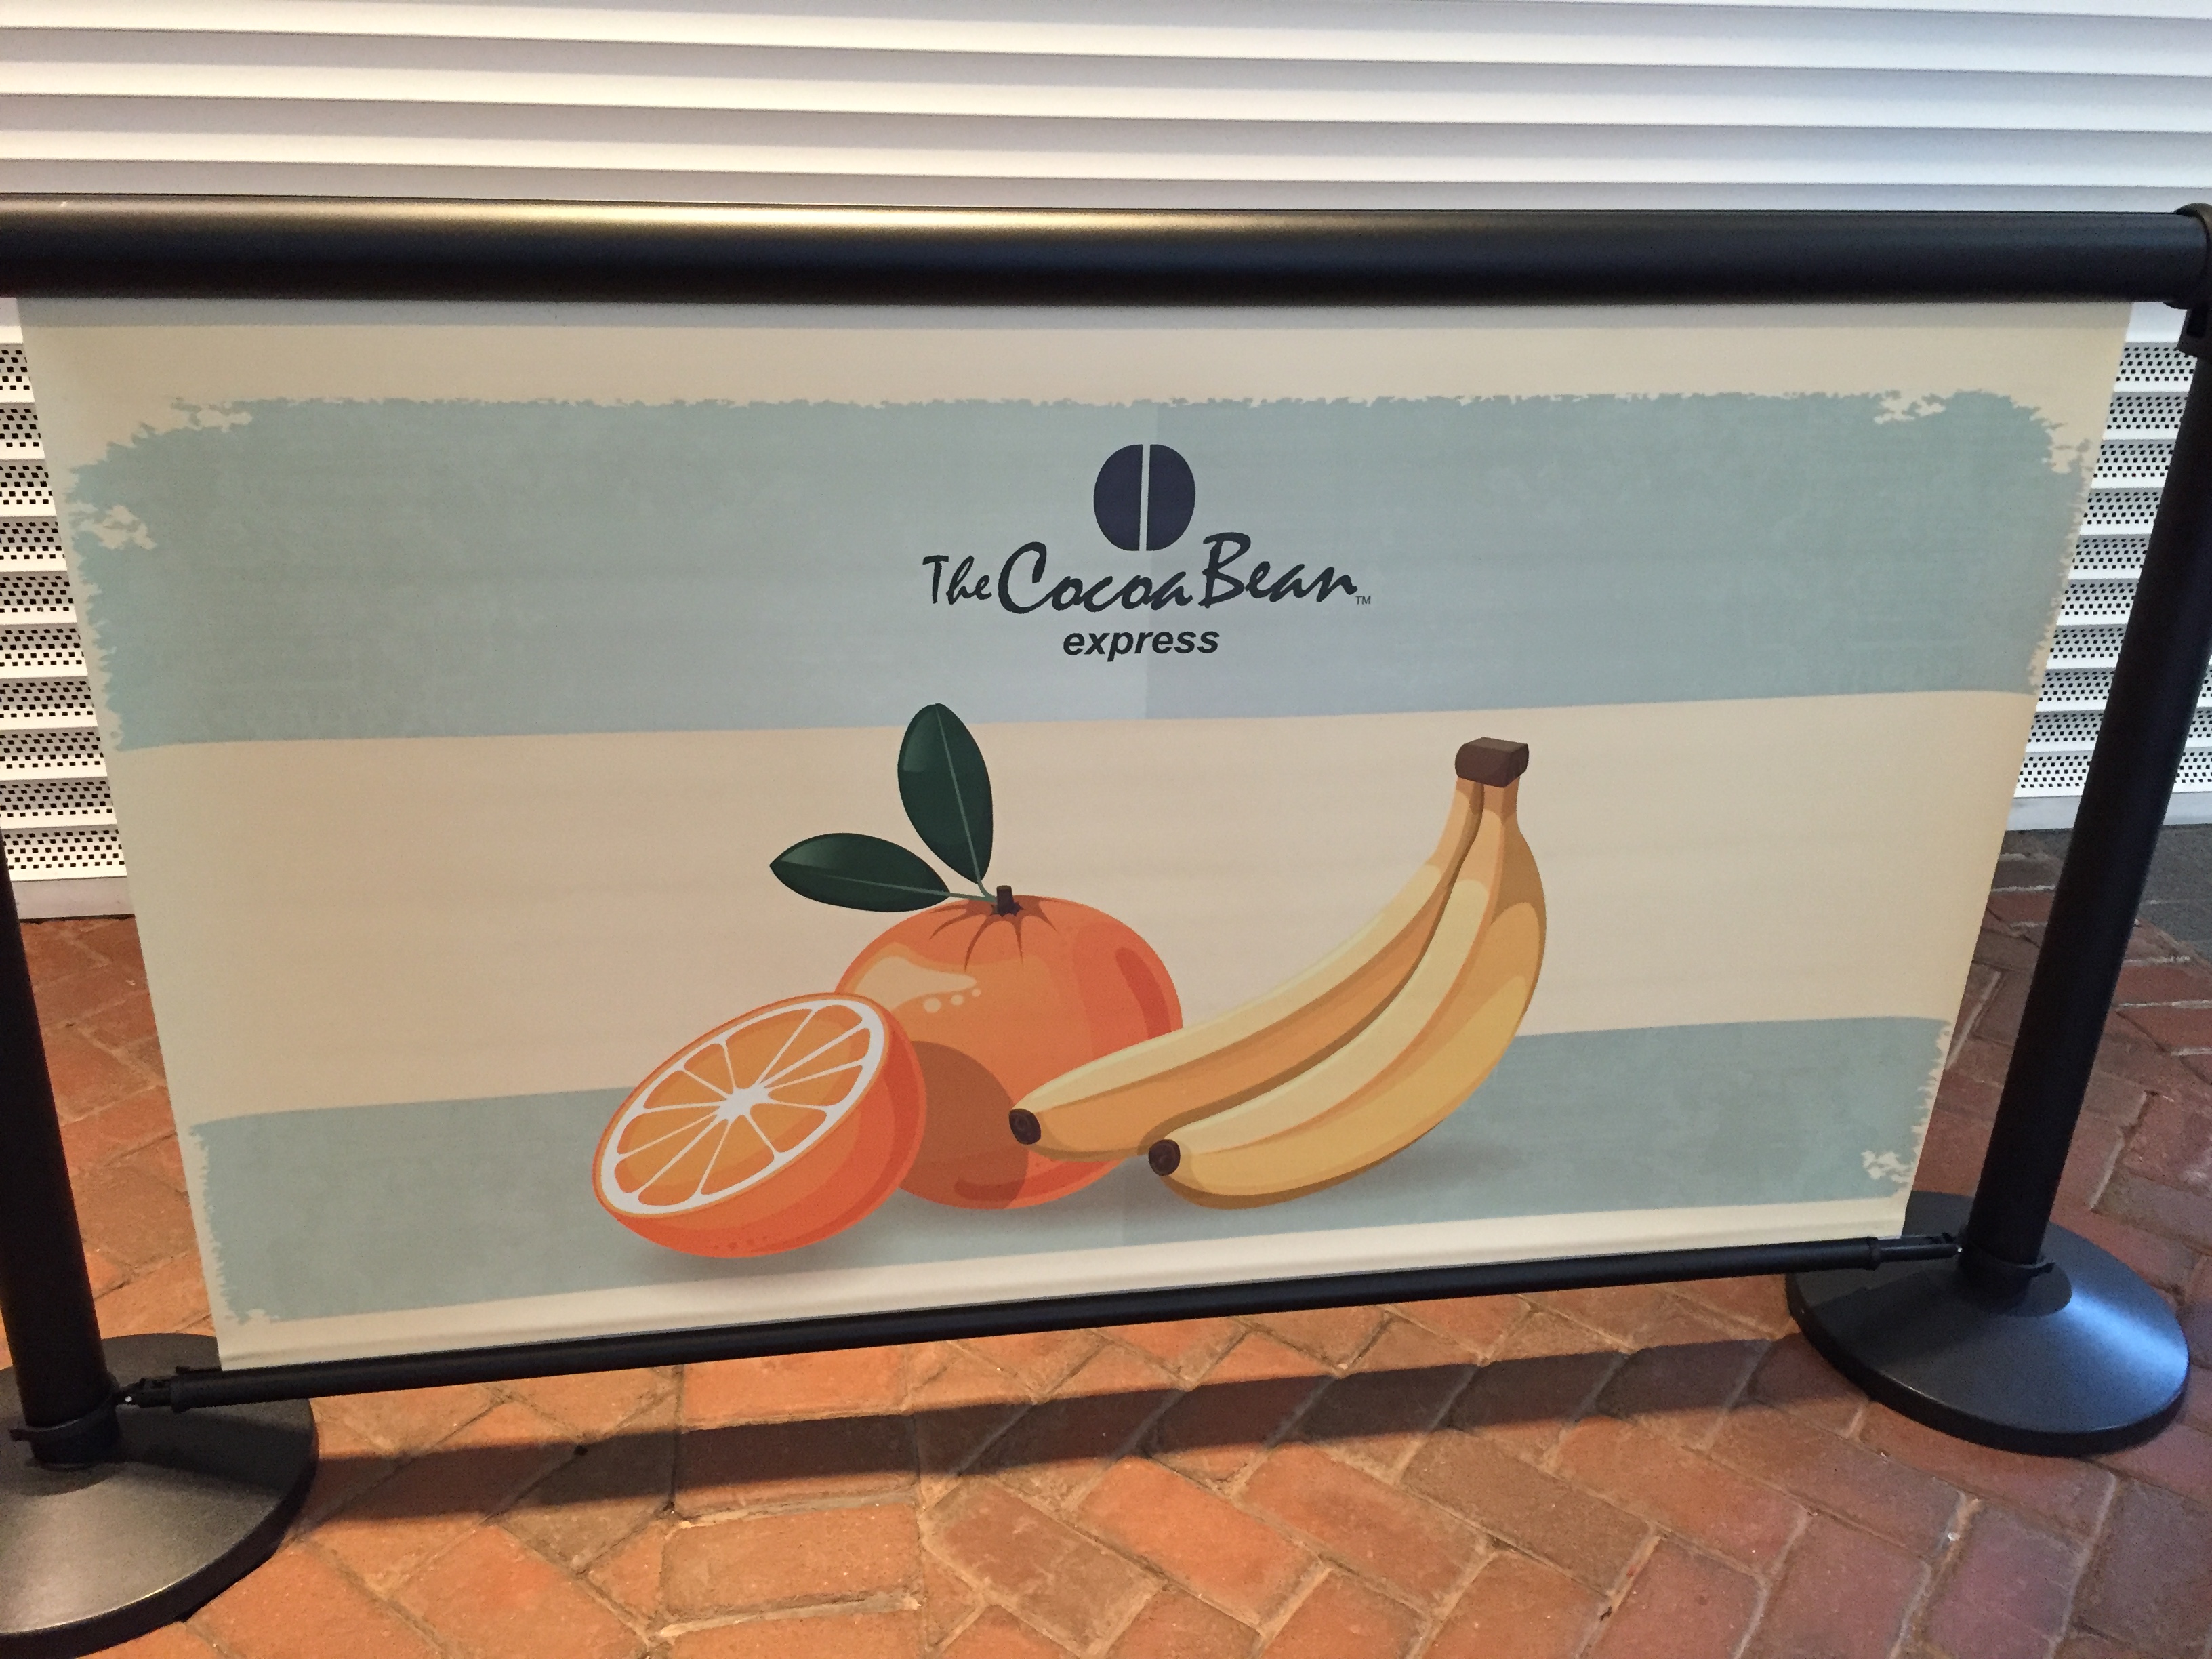 Fresh Fruit Q-Banner Display at Cocoa Bean Cafe